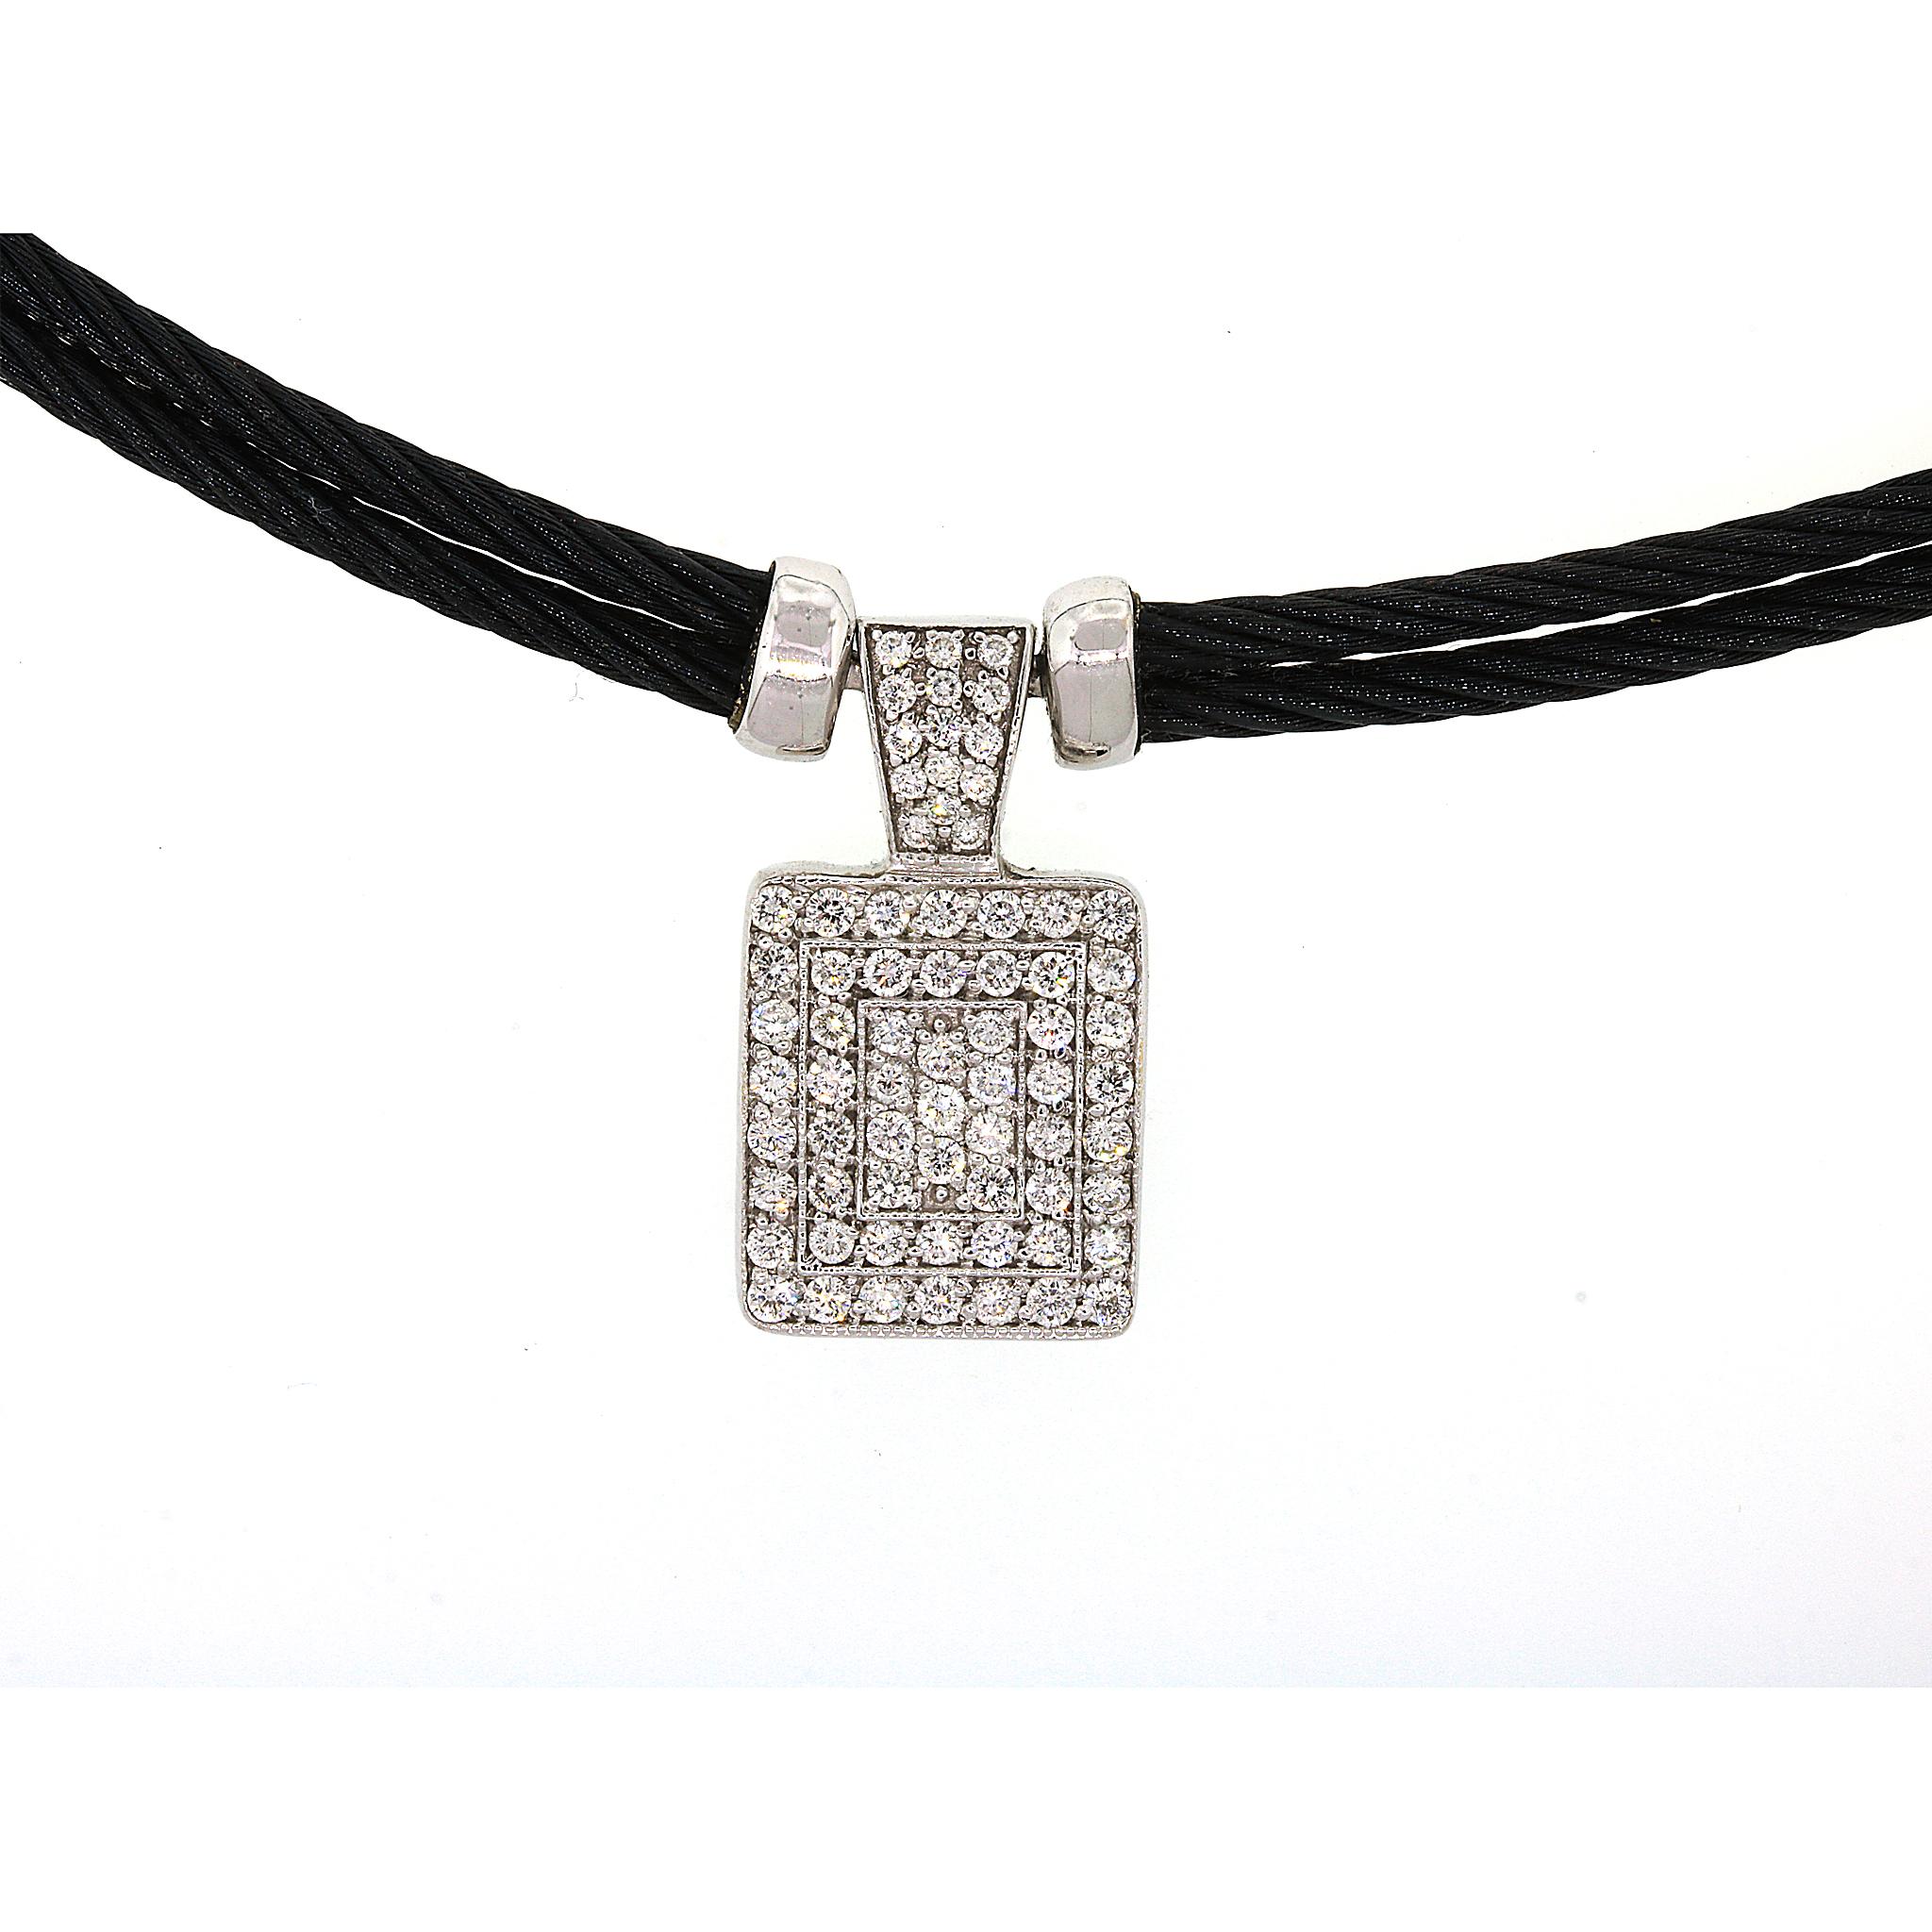 18 kt White Gold
Diamond: 0.65 ct twd
Black Cord Length: 15.5 inches
Pendant measurements: 22mm / 12 mm.
Color / Clarity: E / VVS 

Special Note: Matching Celtic Noir Necklace and Earrings are available individually and as a set. 